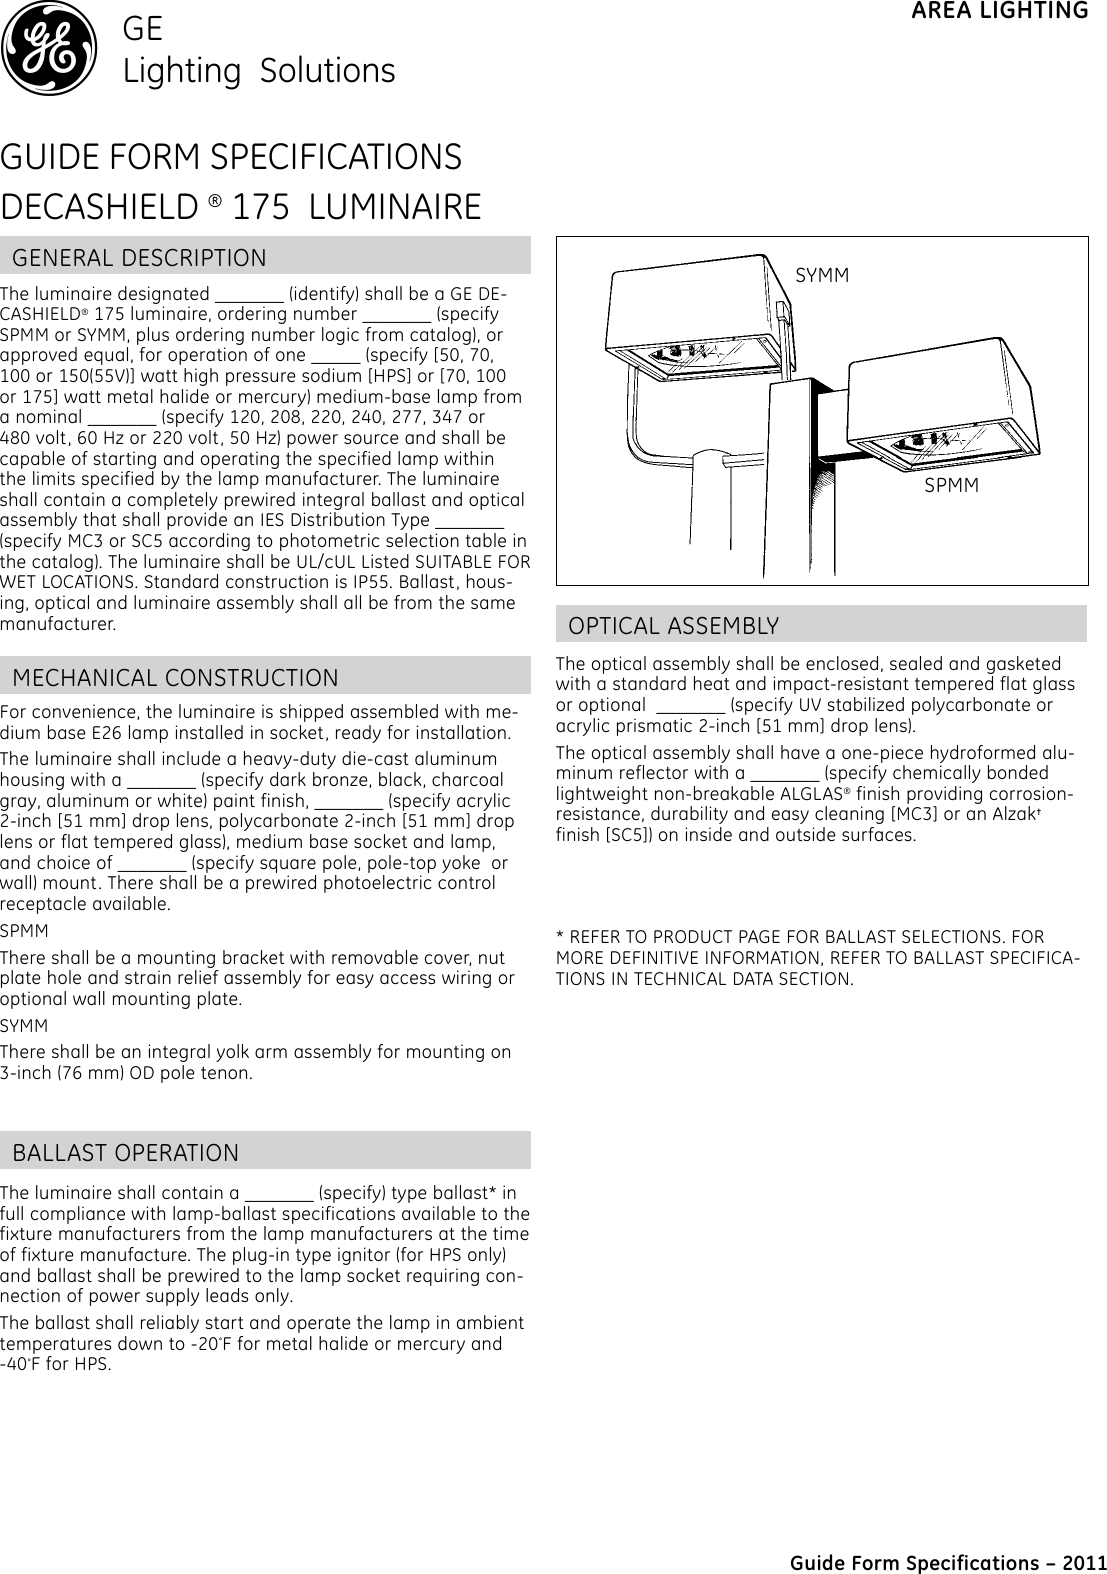 Page 1 of 2 - Ge-Appliances Ge-Spmm-And-Symm-Specification-Sheet- GE Outdoor Area Site Lighting Decashield 175 Luminaire Spec Sheet |  Ge-spmm-and-symm-specification-sheet